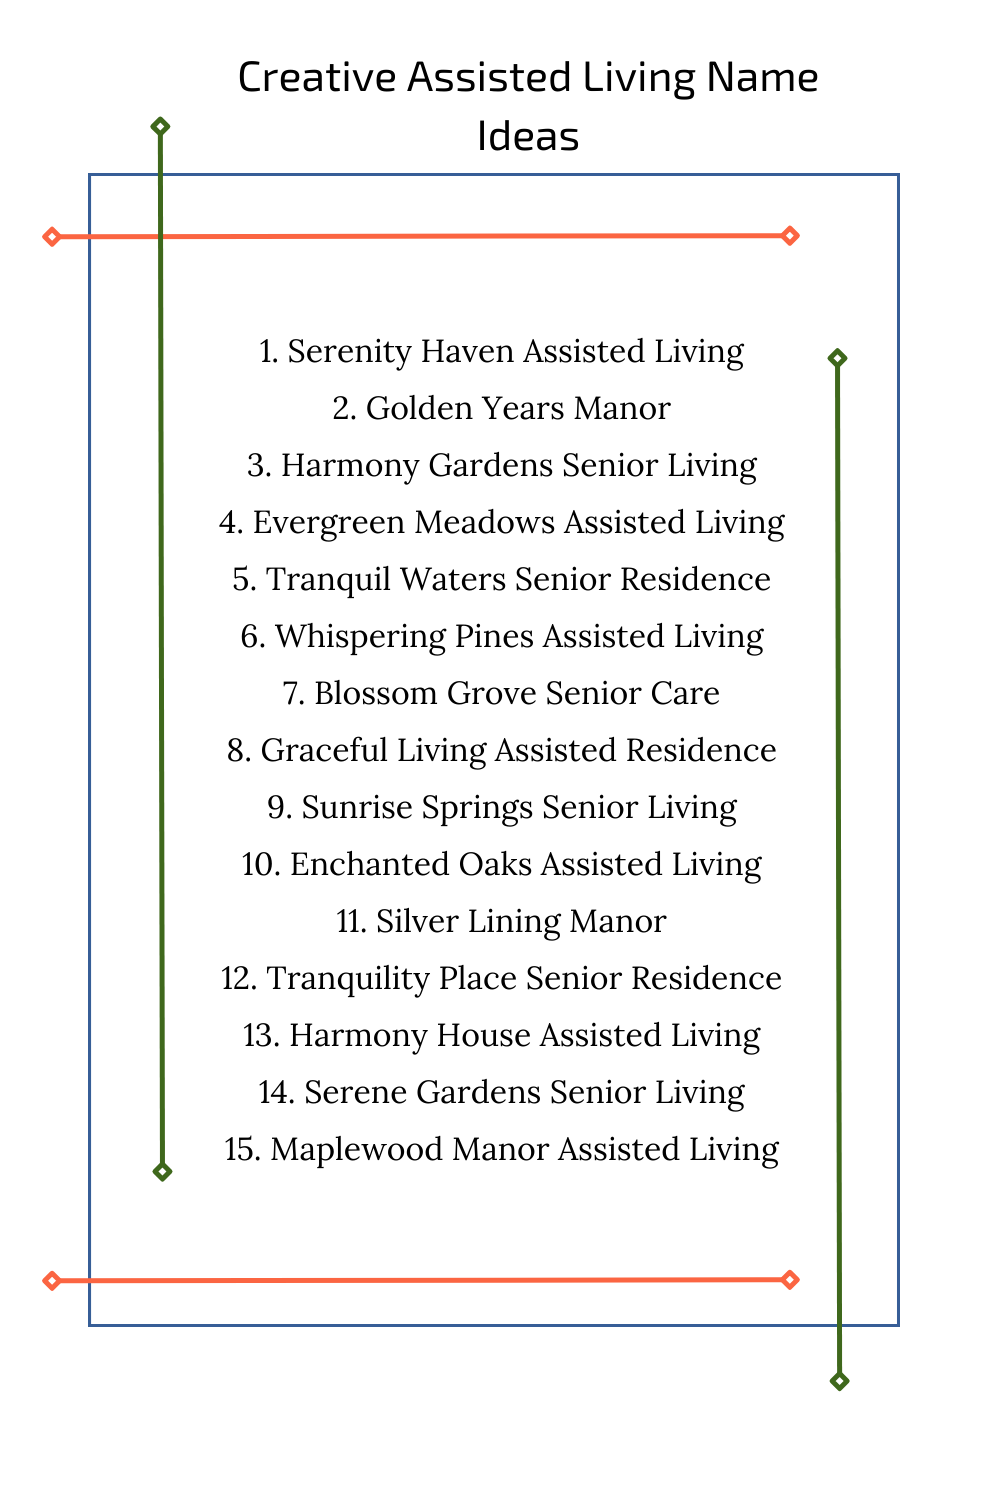 Creative Assisted Living Name Ideas